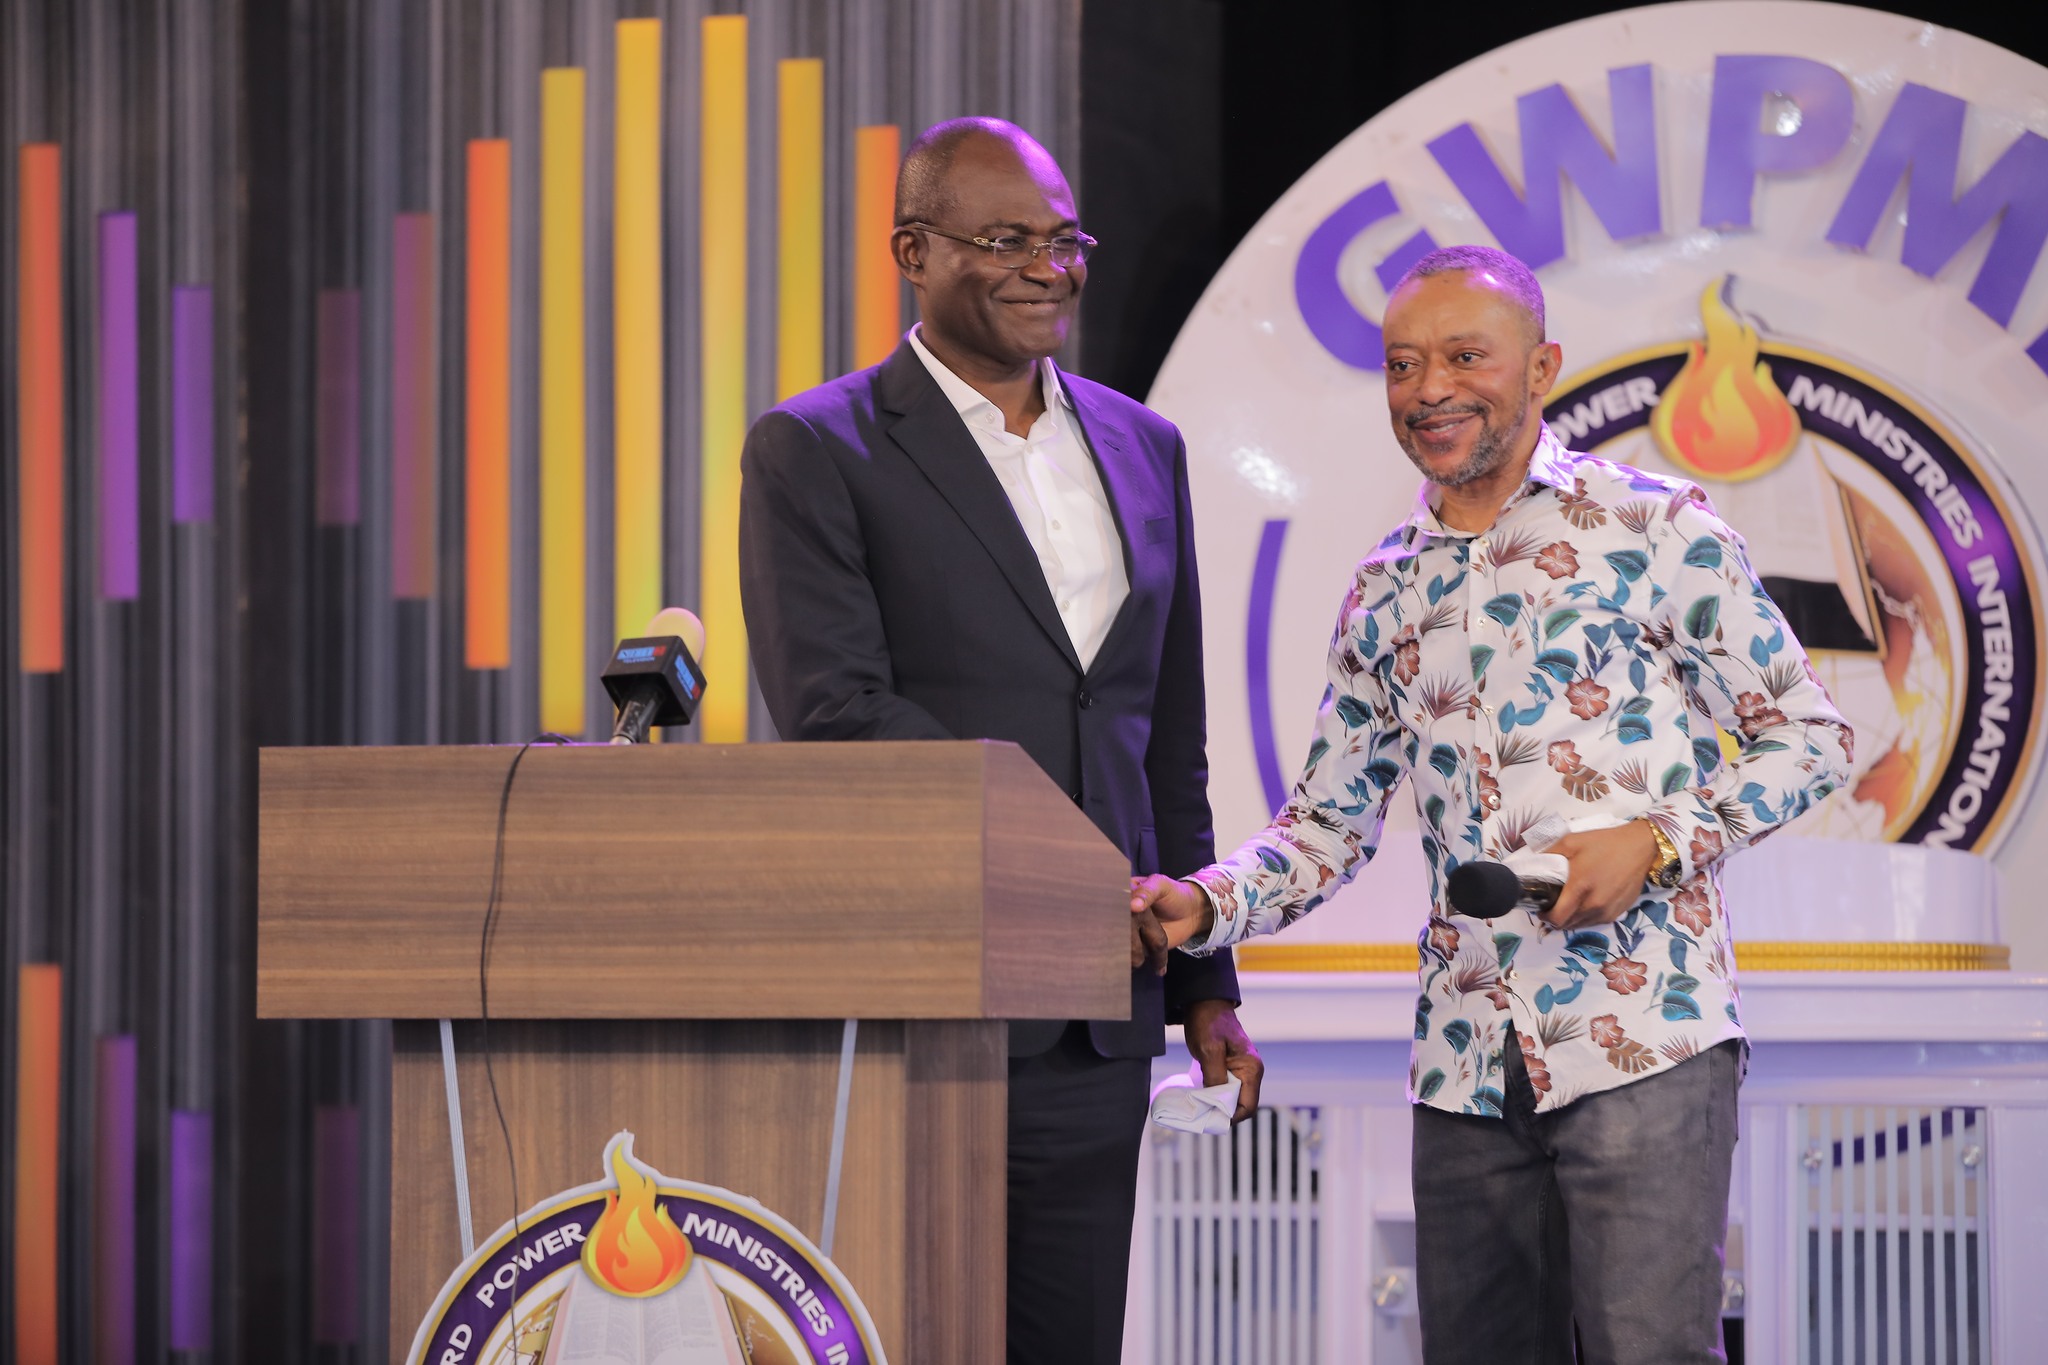 The presidential campaign of Assin Central MP, Kennedy Ohene Agyapong has received a massive boost after Rev. Dr Isaac Owusu-Bempah publicly endorsed and threw his weight behind him